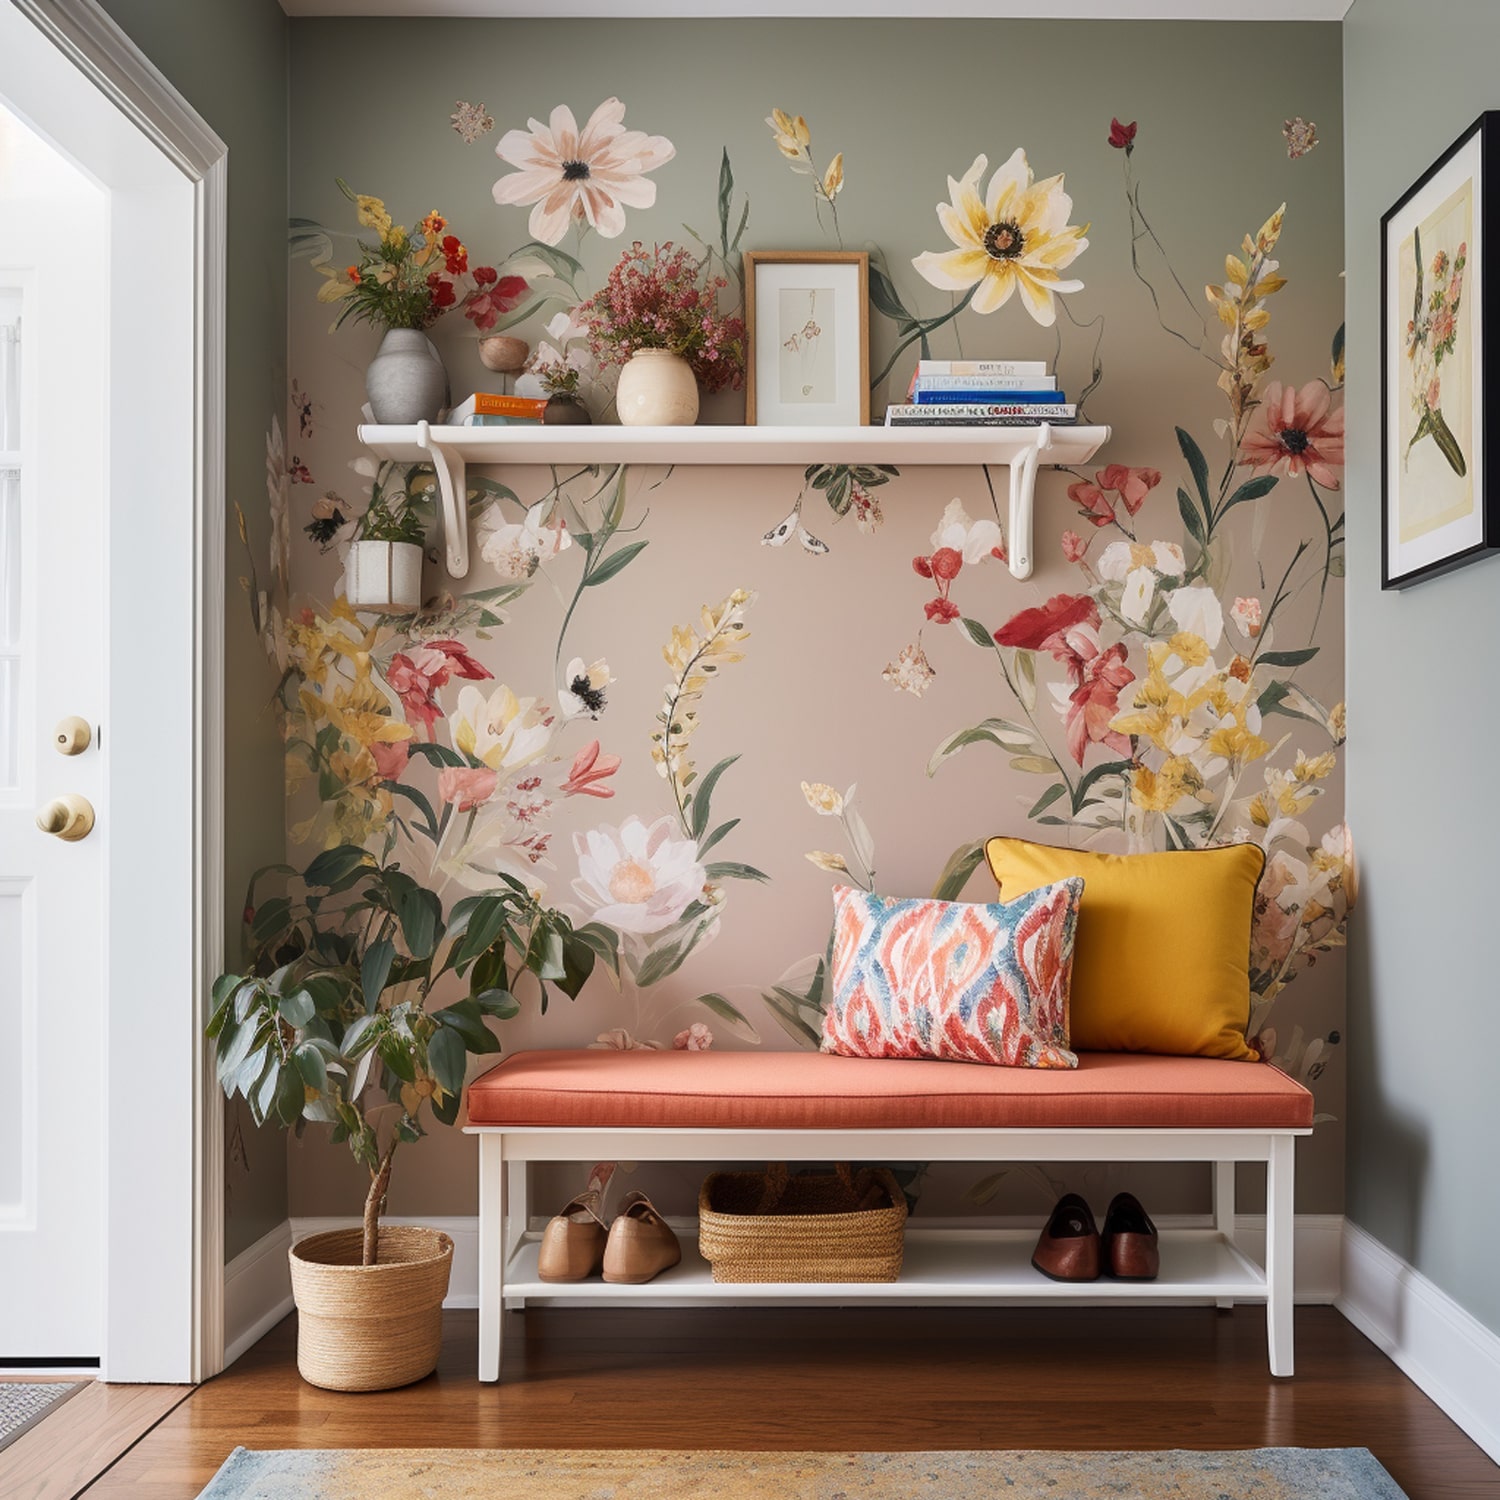 A hallway with a beautiful floral wall mural, featuring vibrant colors and intricate details.